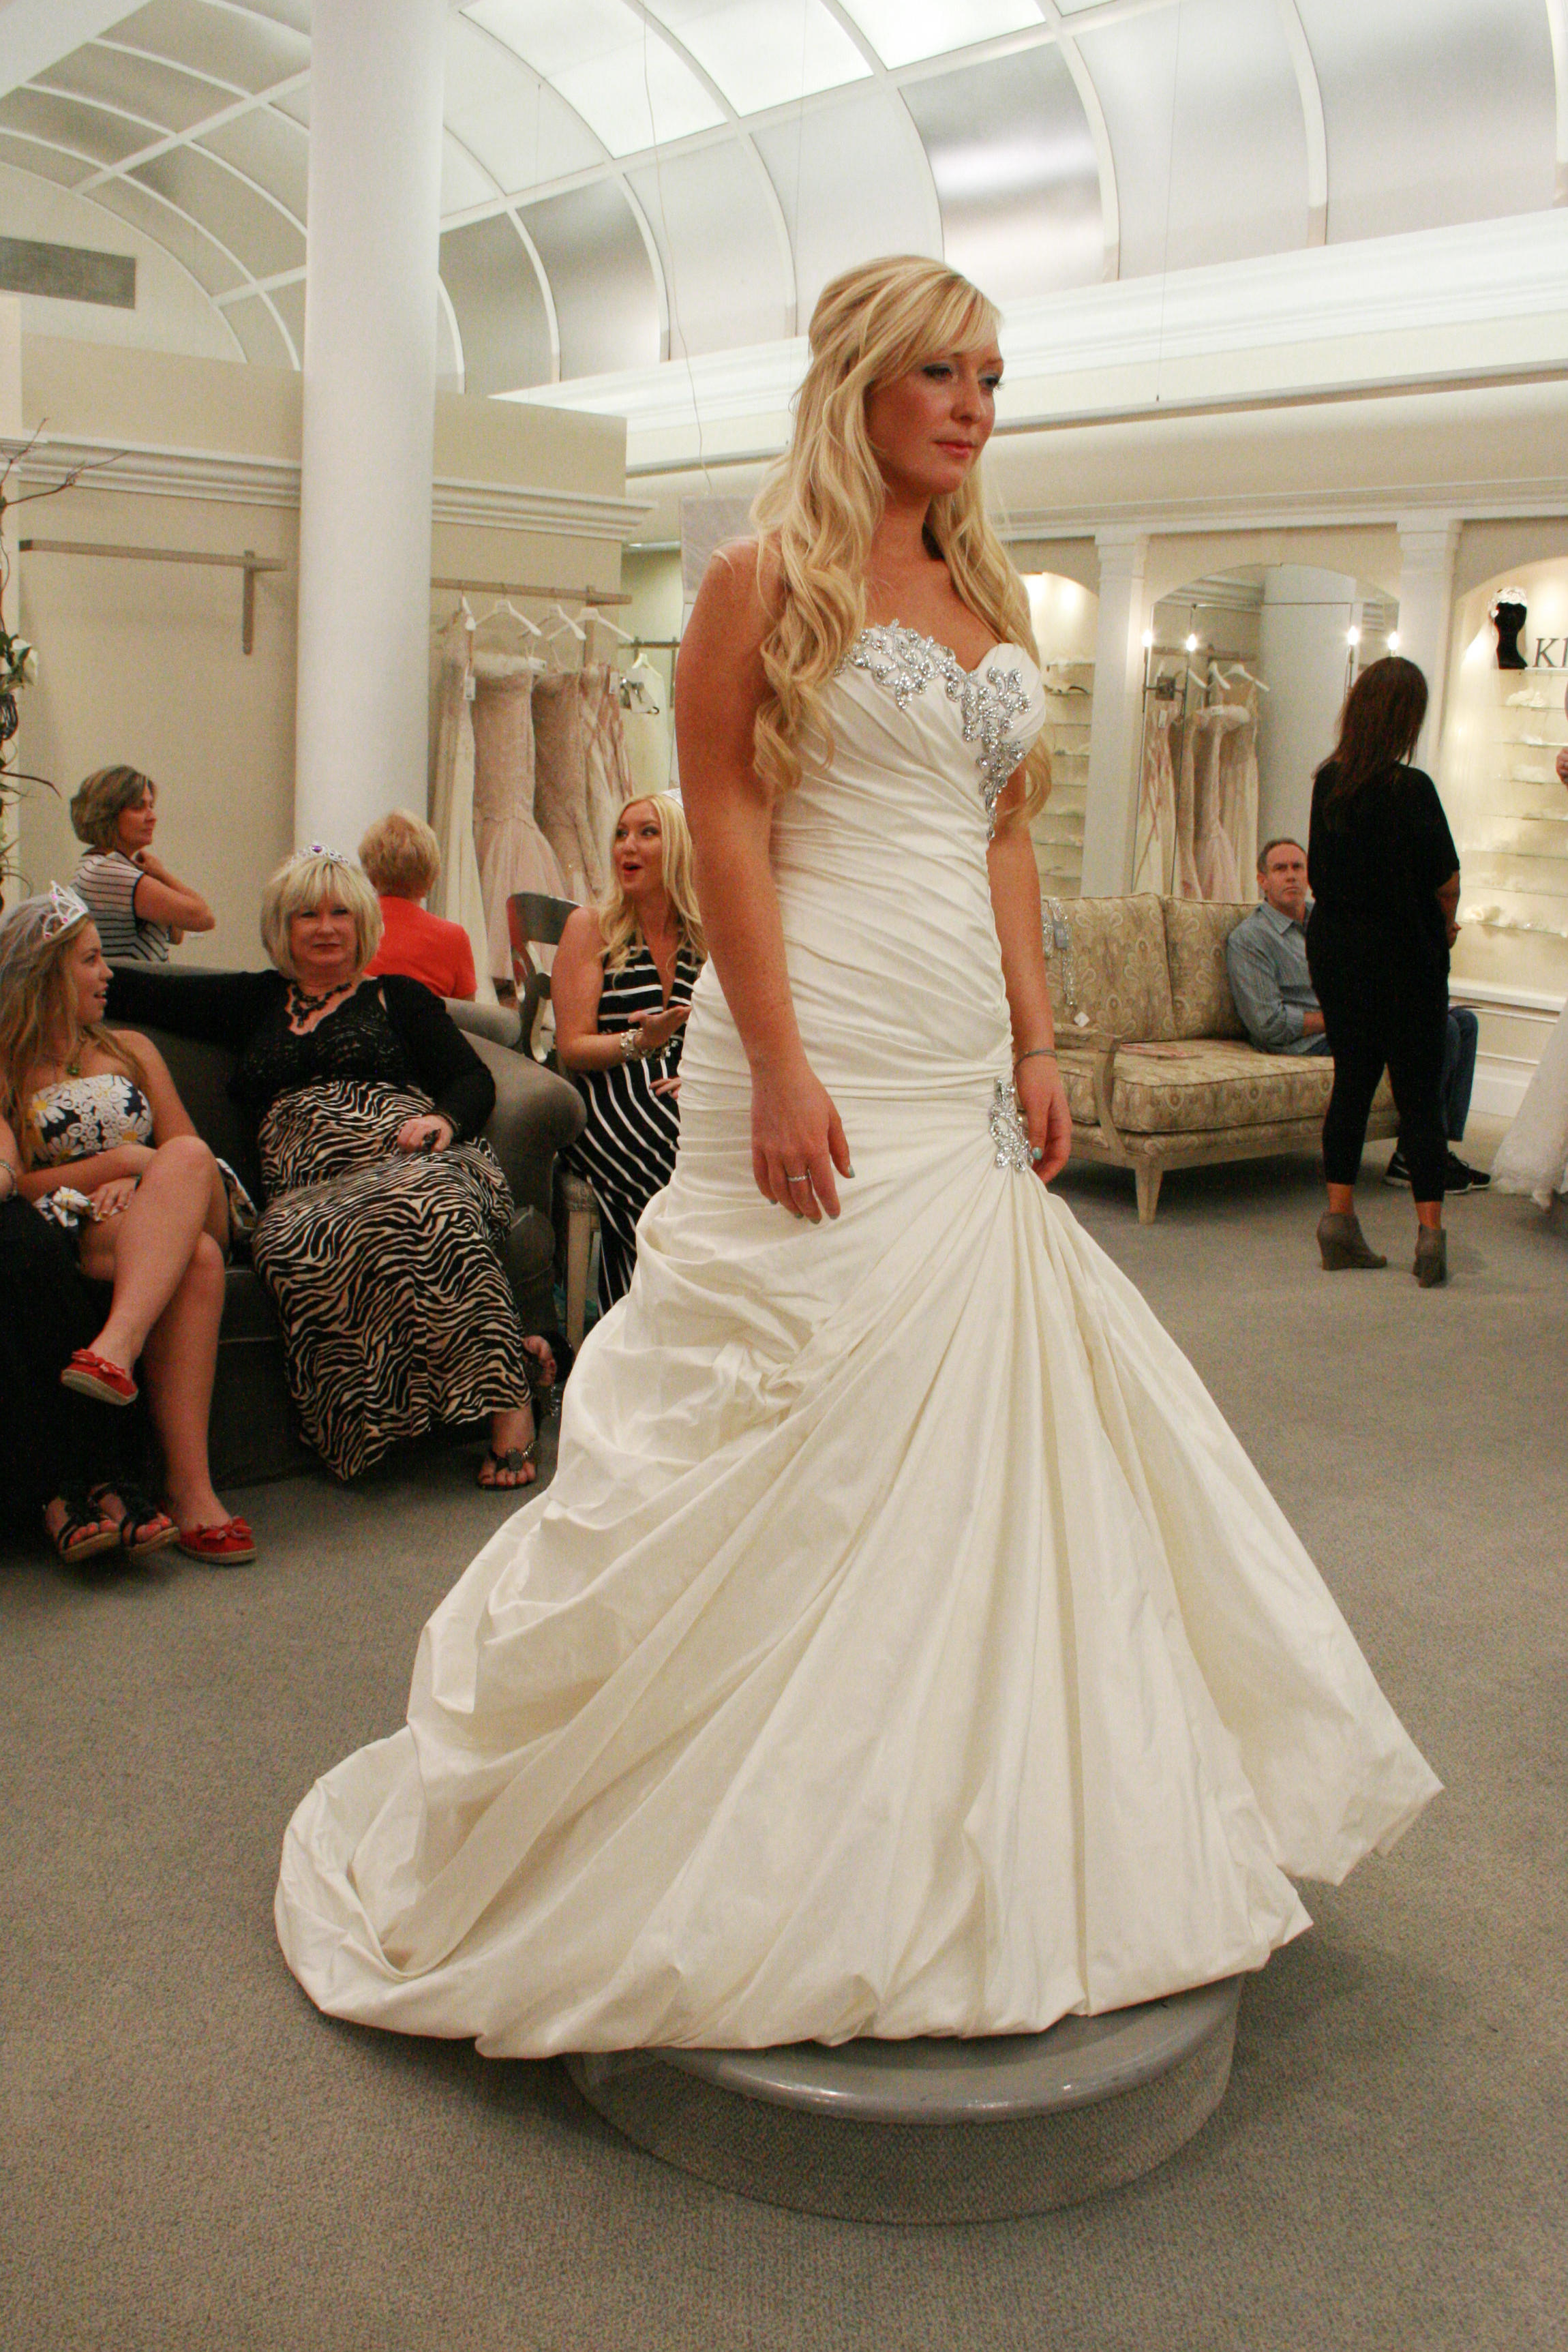 Season 11 Featured Wedding Dresses, Part 7 Say Yes to the Dress TLC